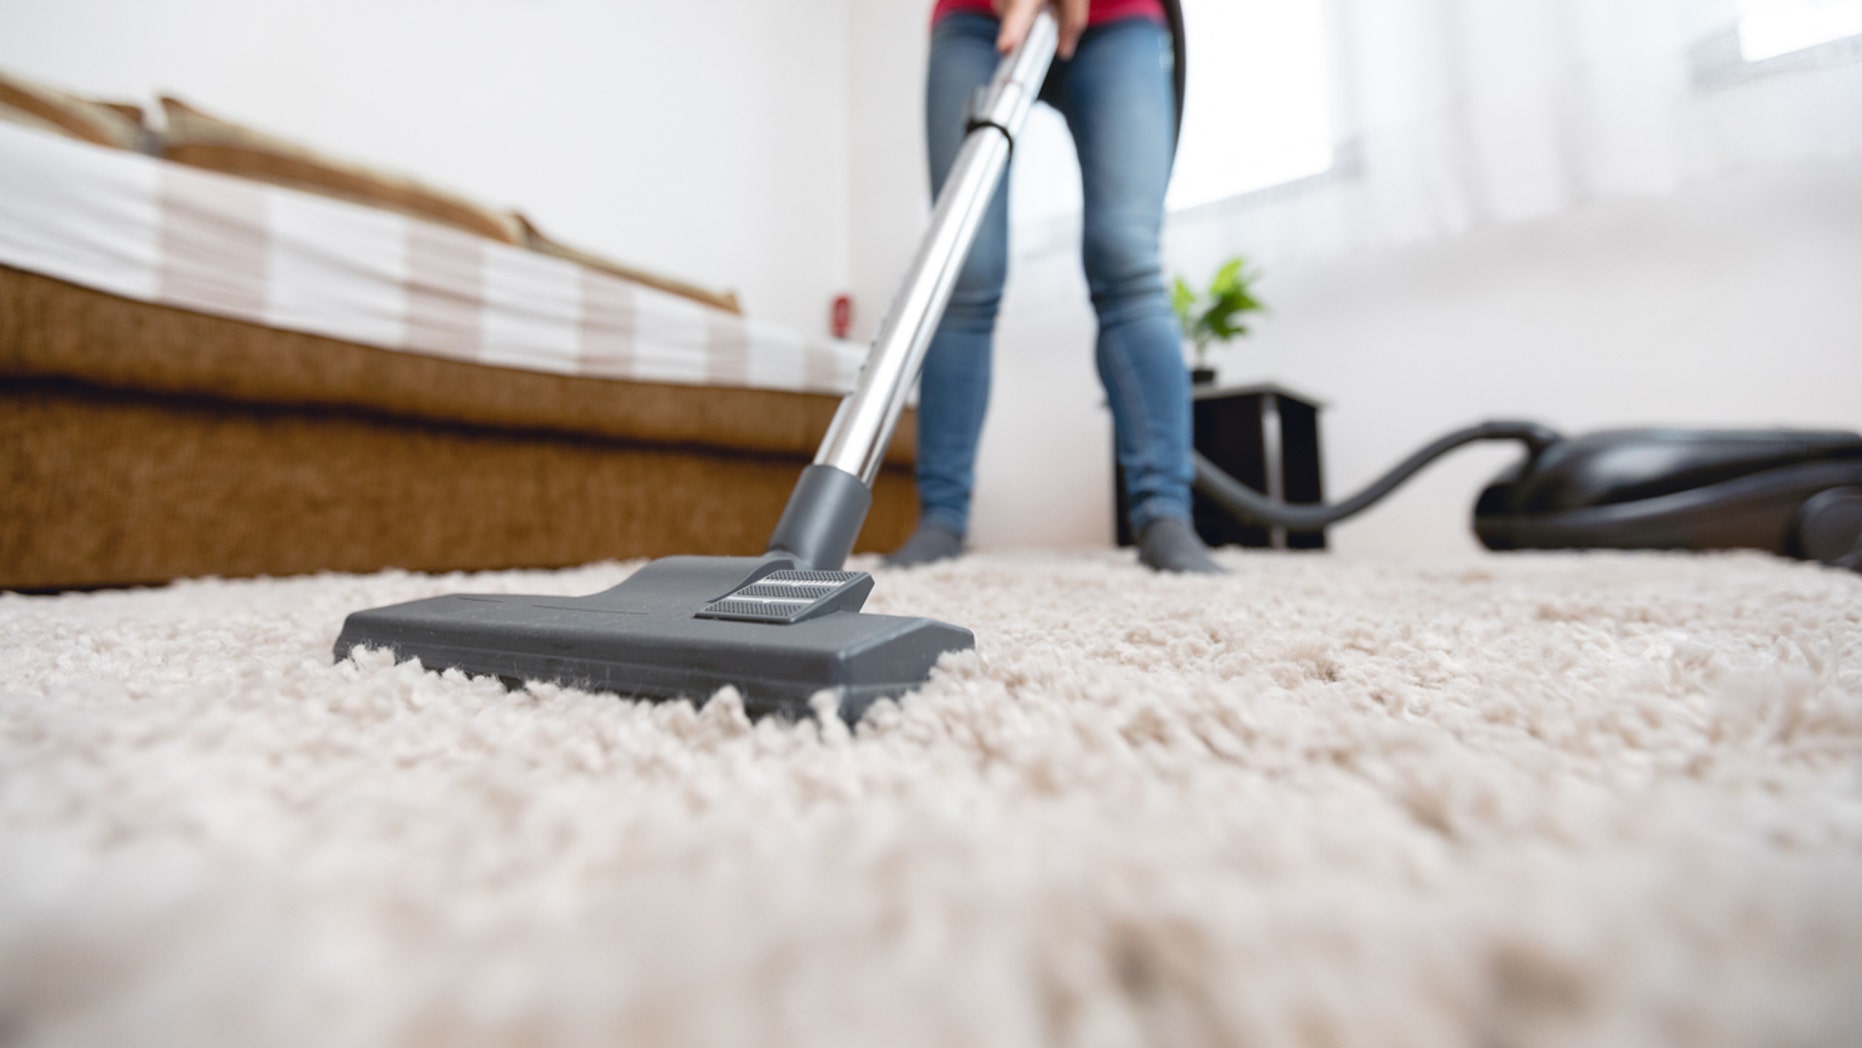 Your vacuuming technique can also reduce household dust.